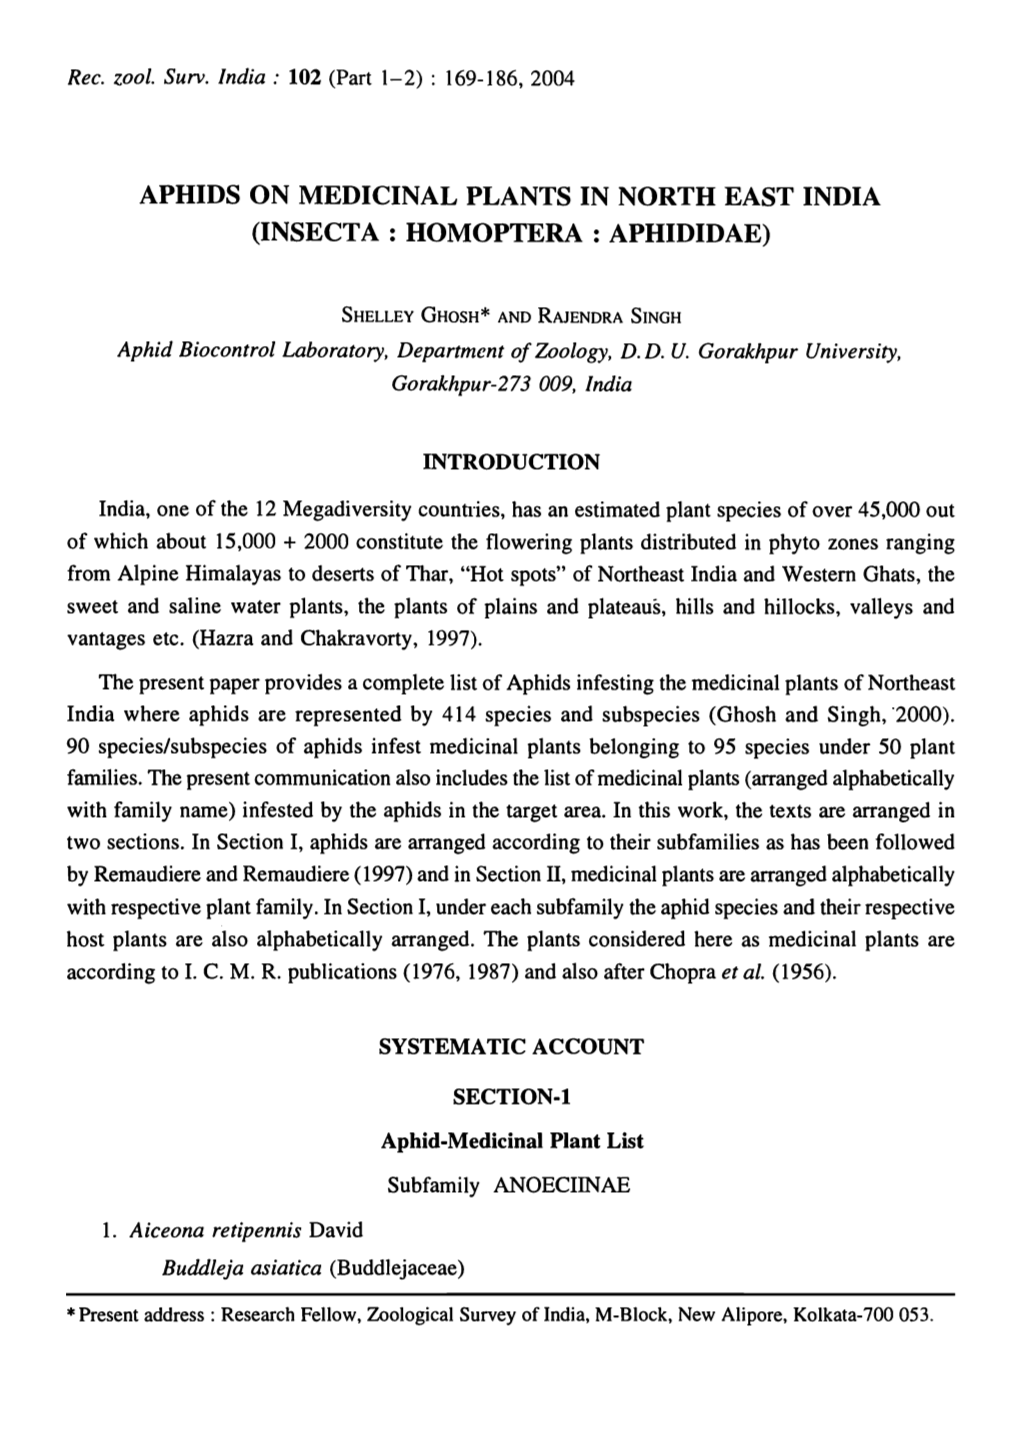 Aphids on Medicinal Plants in North East India (Insecta: Homoptera : Aphididae)